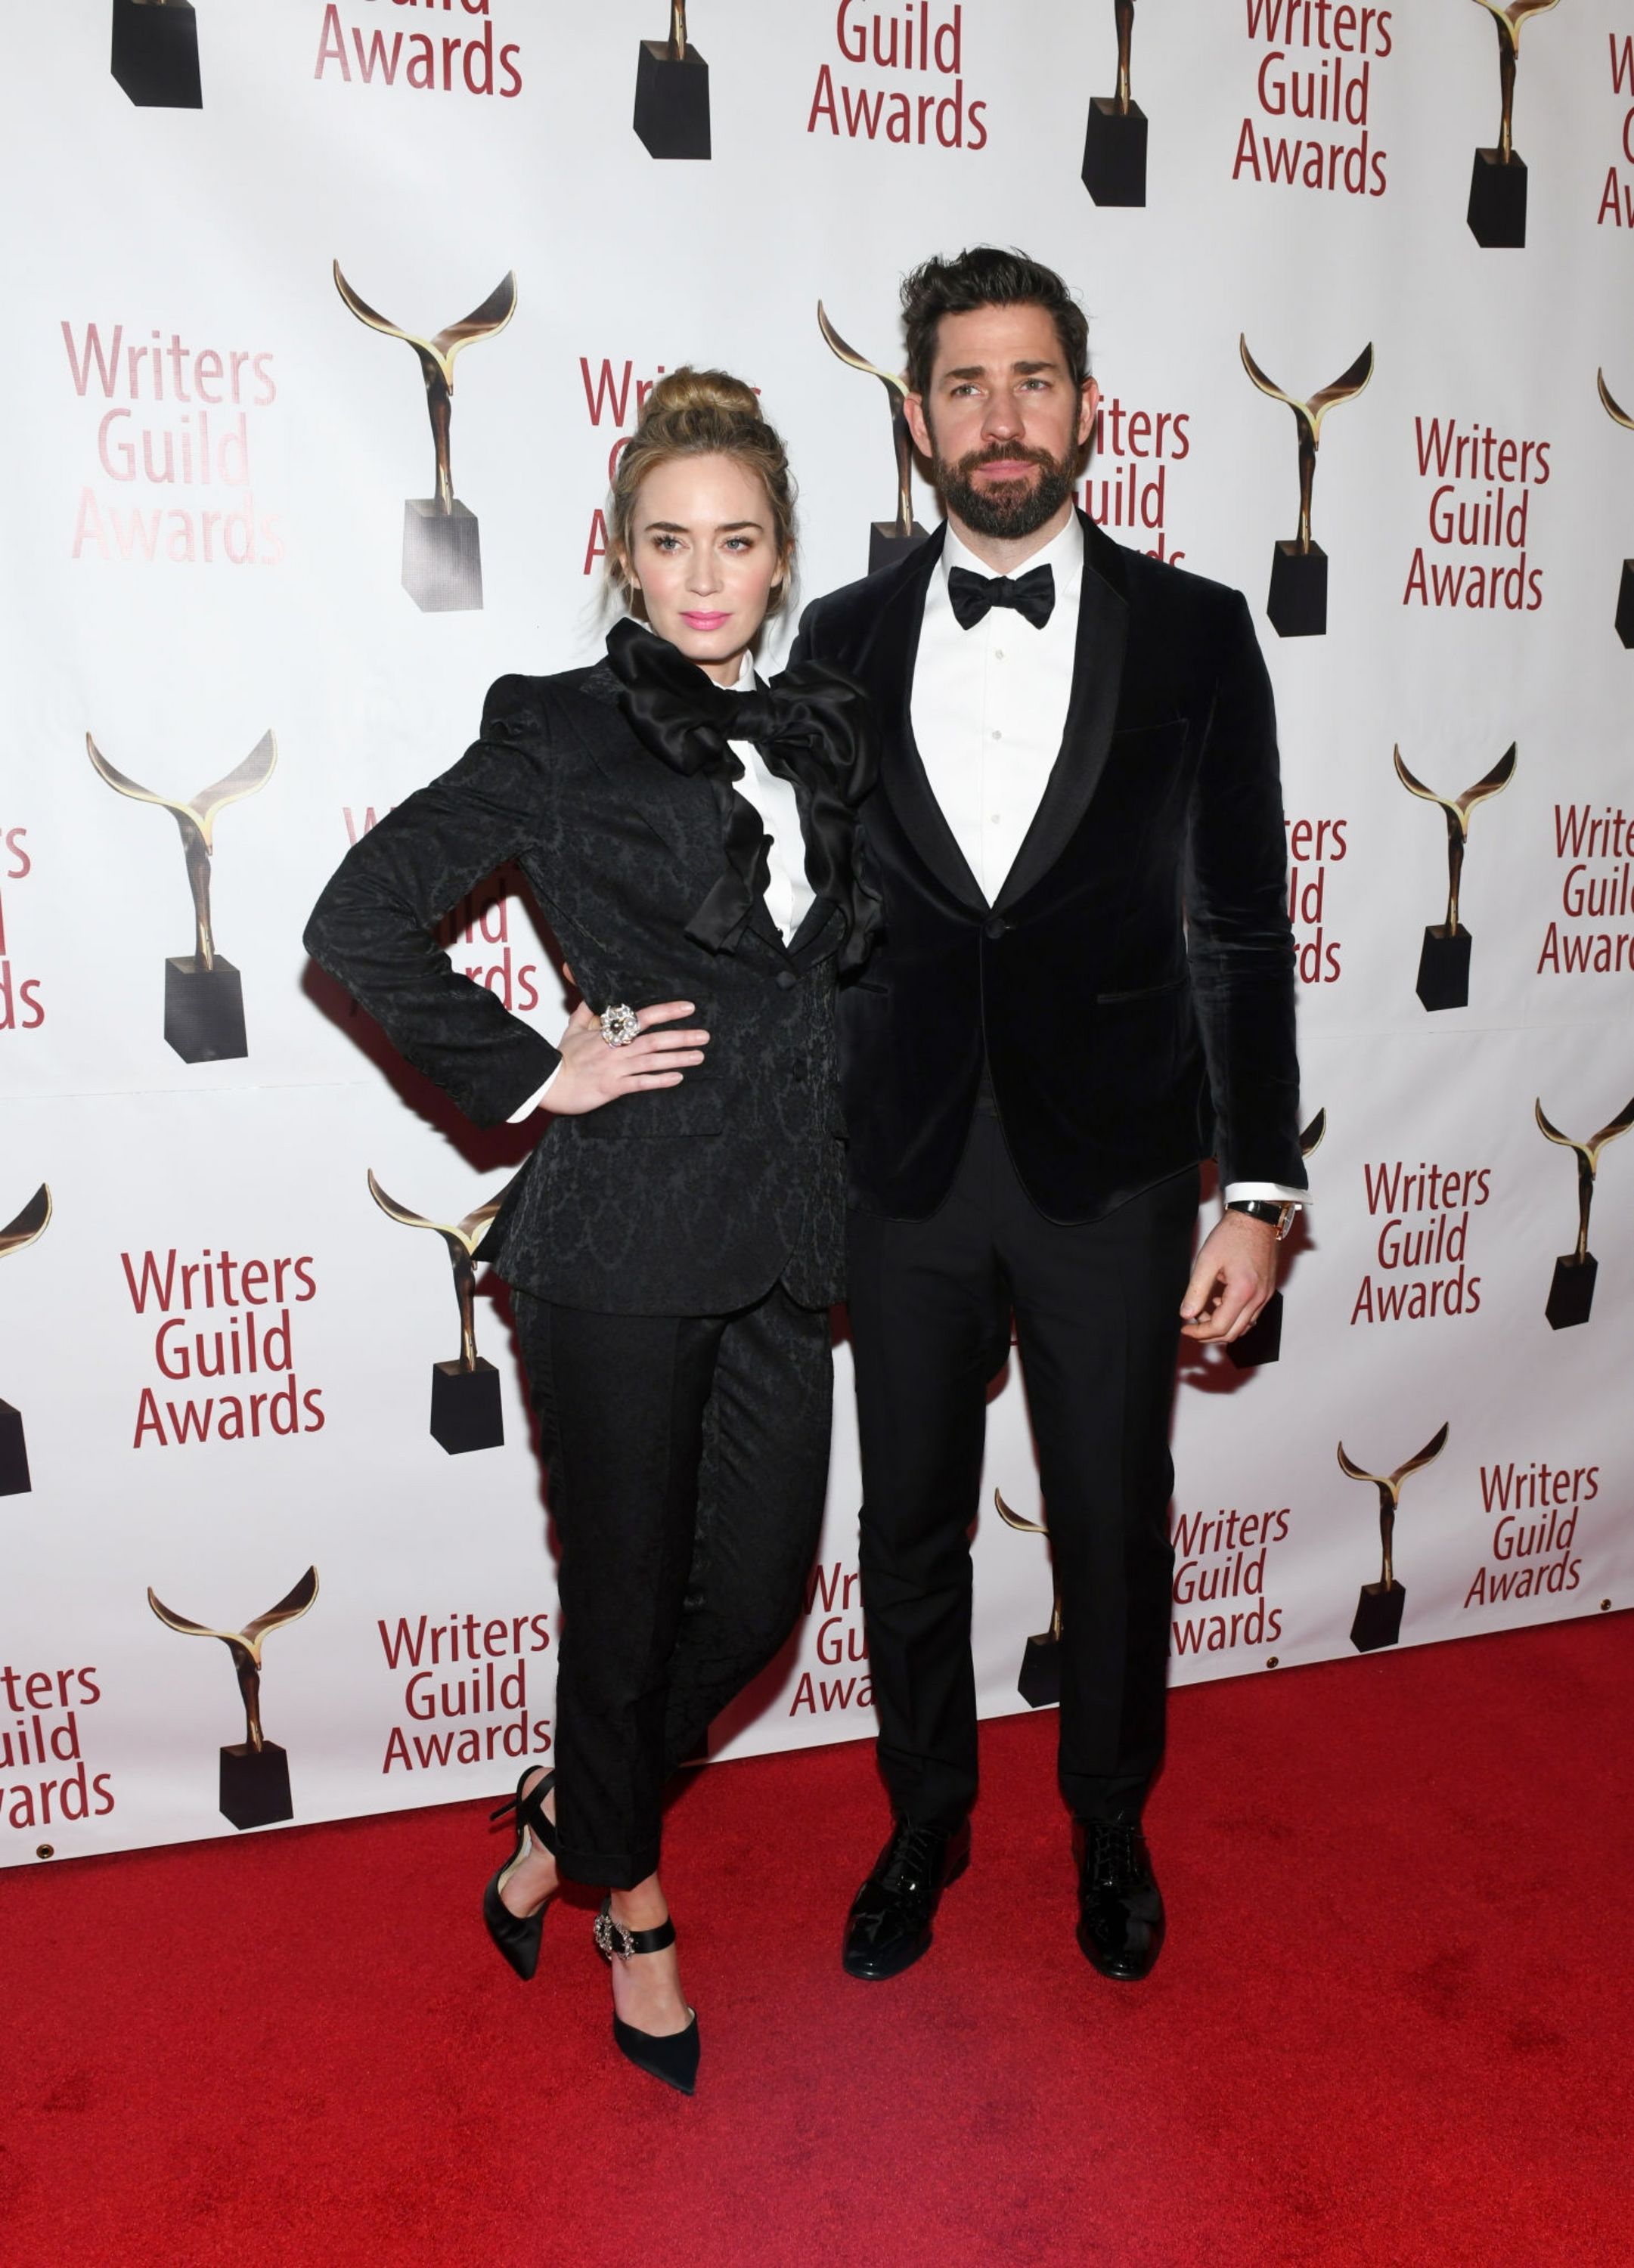 2019-02-17-71st-Annual-Writers-Guild-Awards-046.jpg